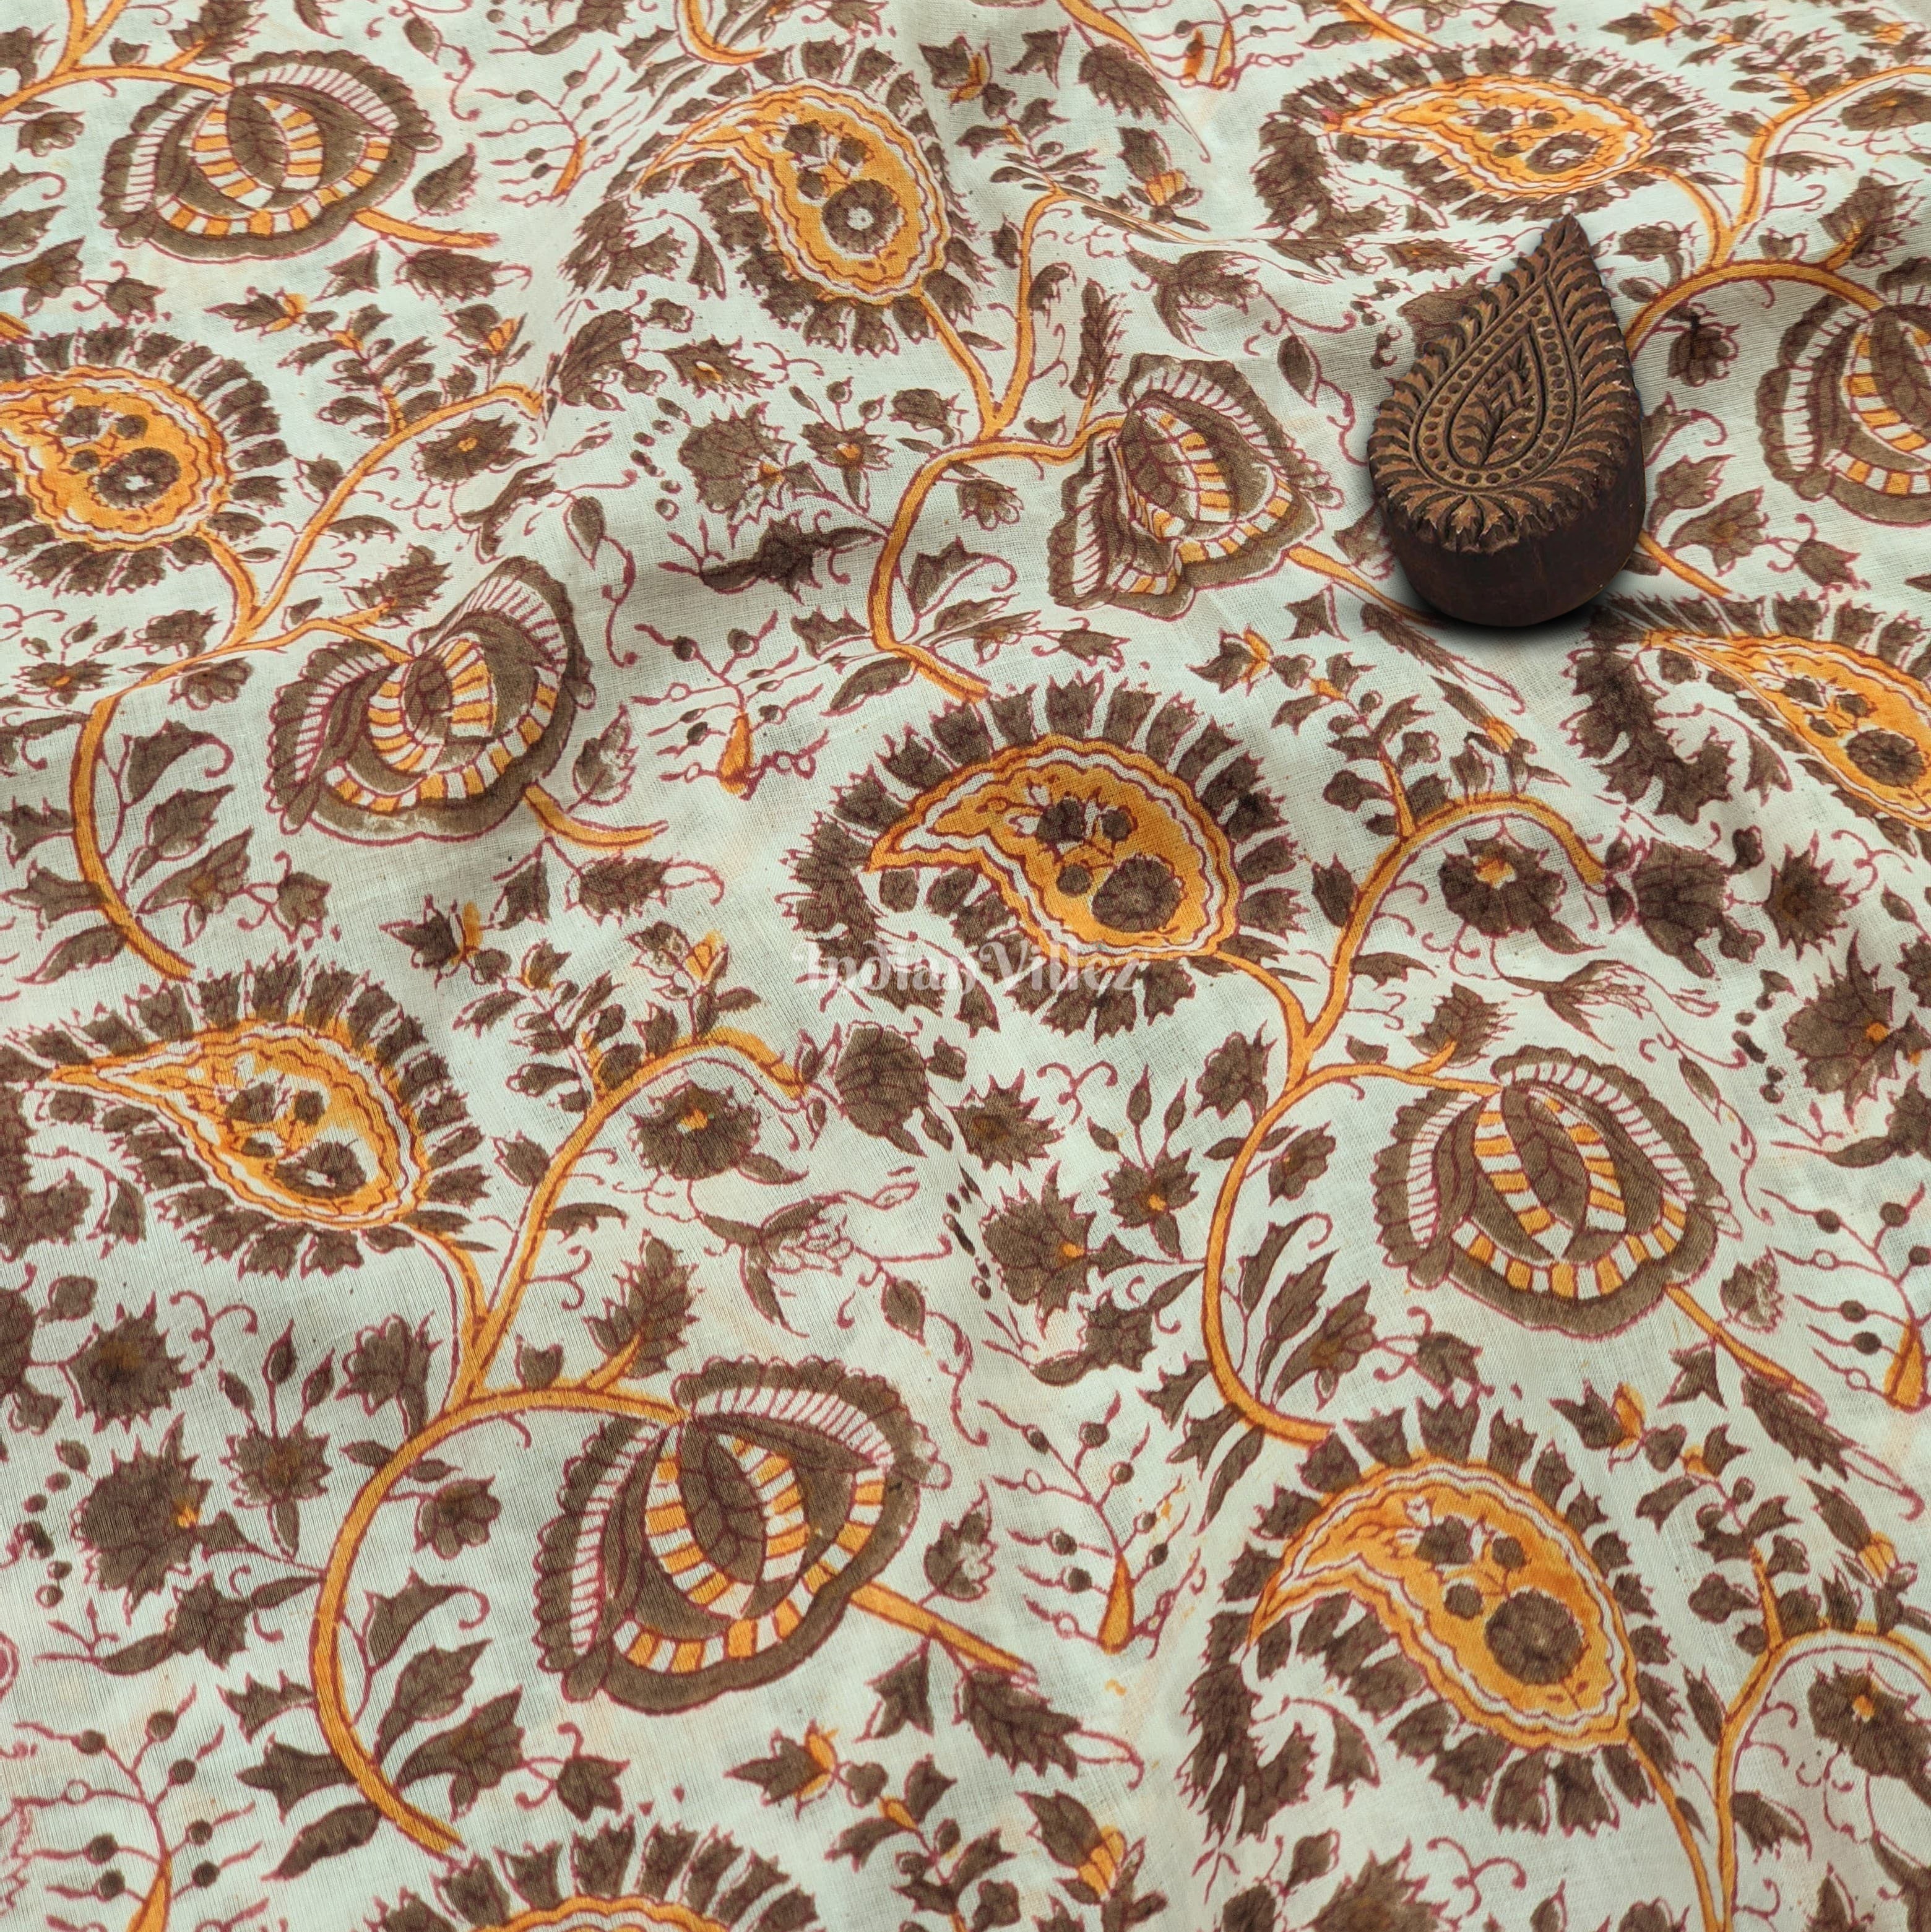 Off White Multicolored Floral Hand Block Printed Cotton Fabric